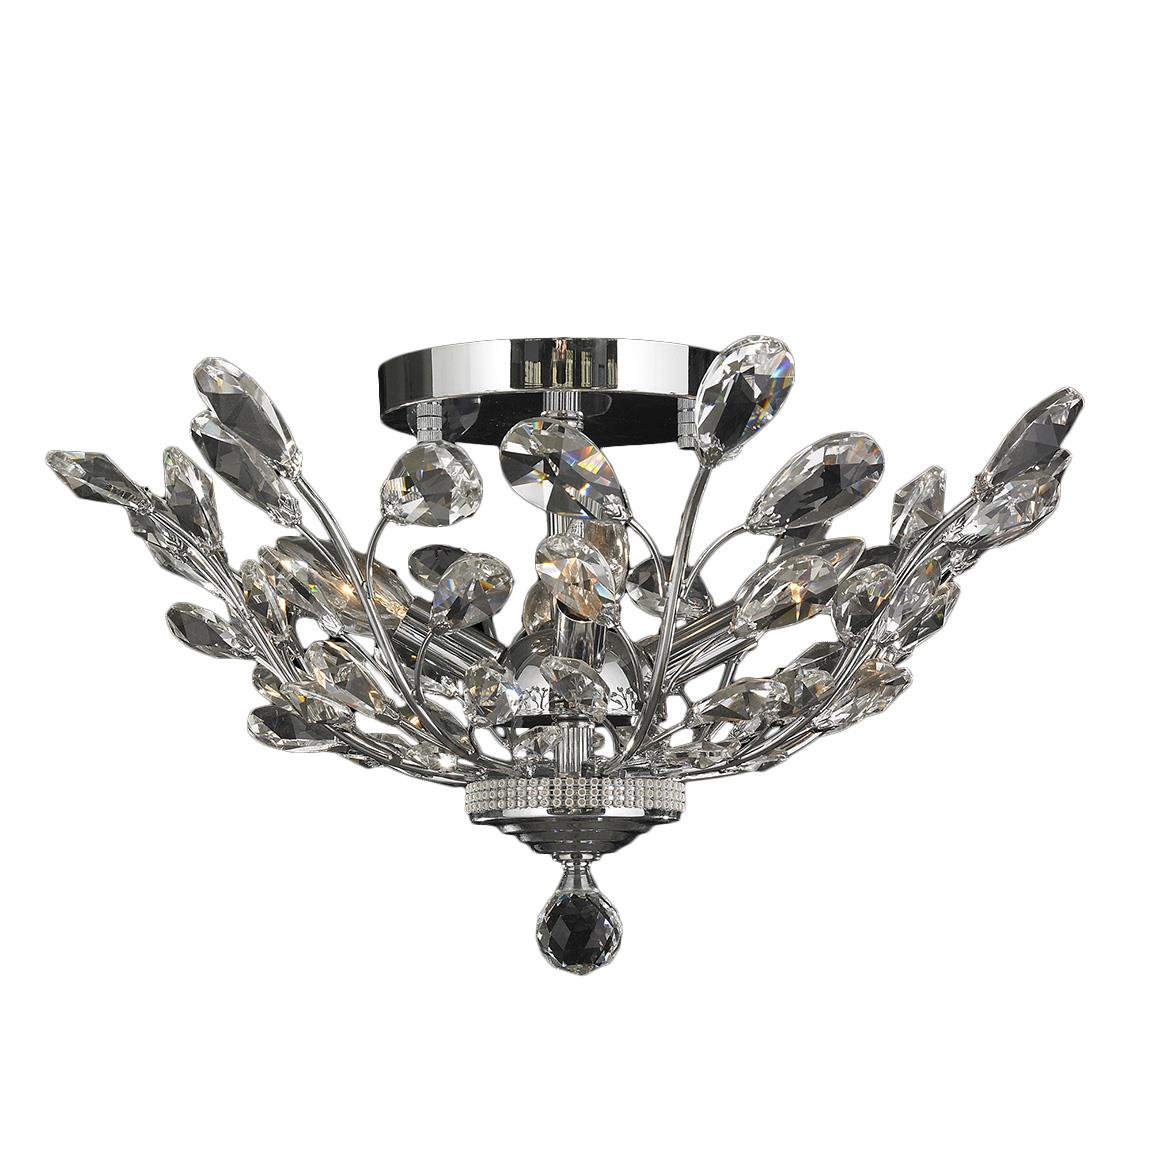 Aspen Collection 4 light Chrome Finish and Clear Crystal Semi Flush Mount Ceiling Light